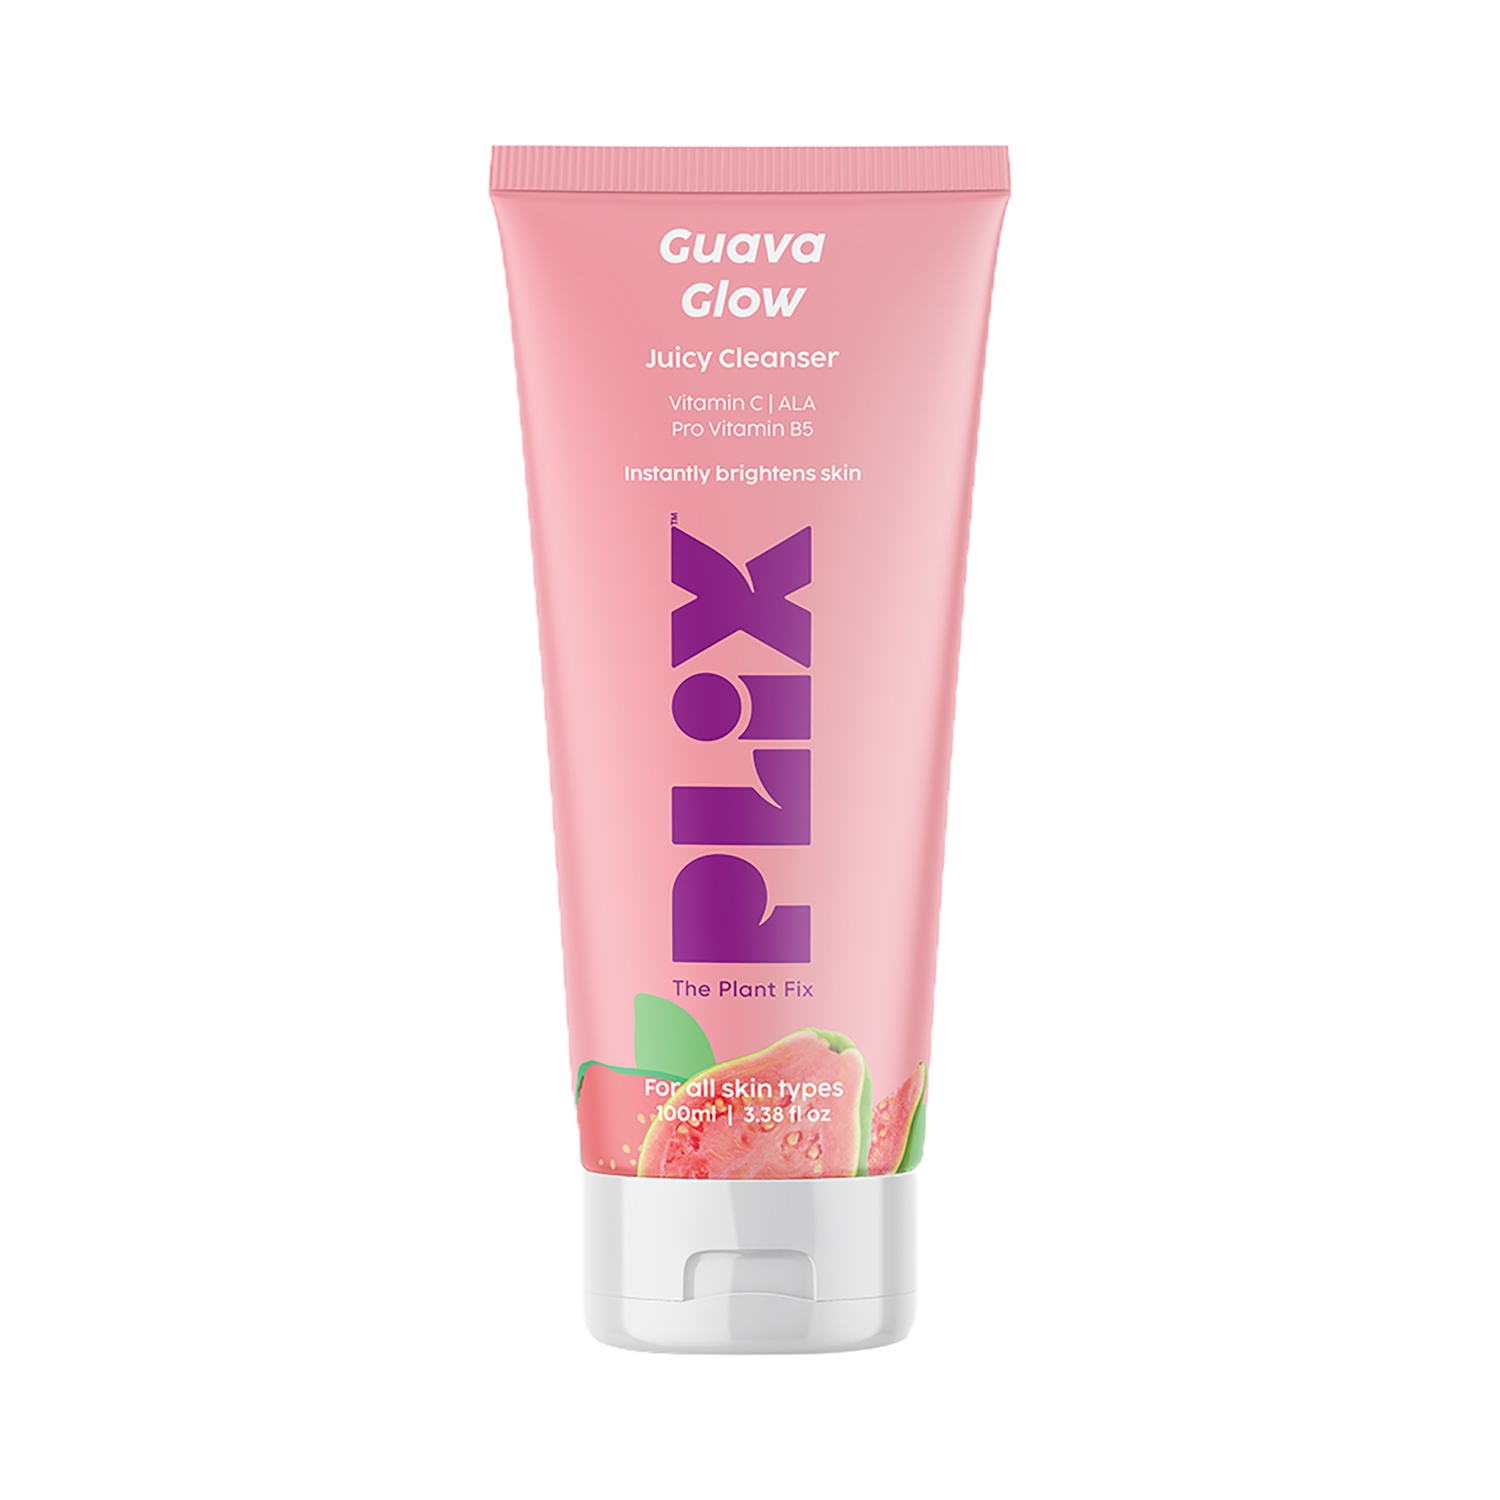 Plix The Plant Fix | Plix The Plant Fix Guava Glow Juicy Cleanser For Skin Brightening With Vitamin C (100ml)